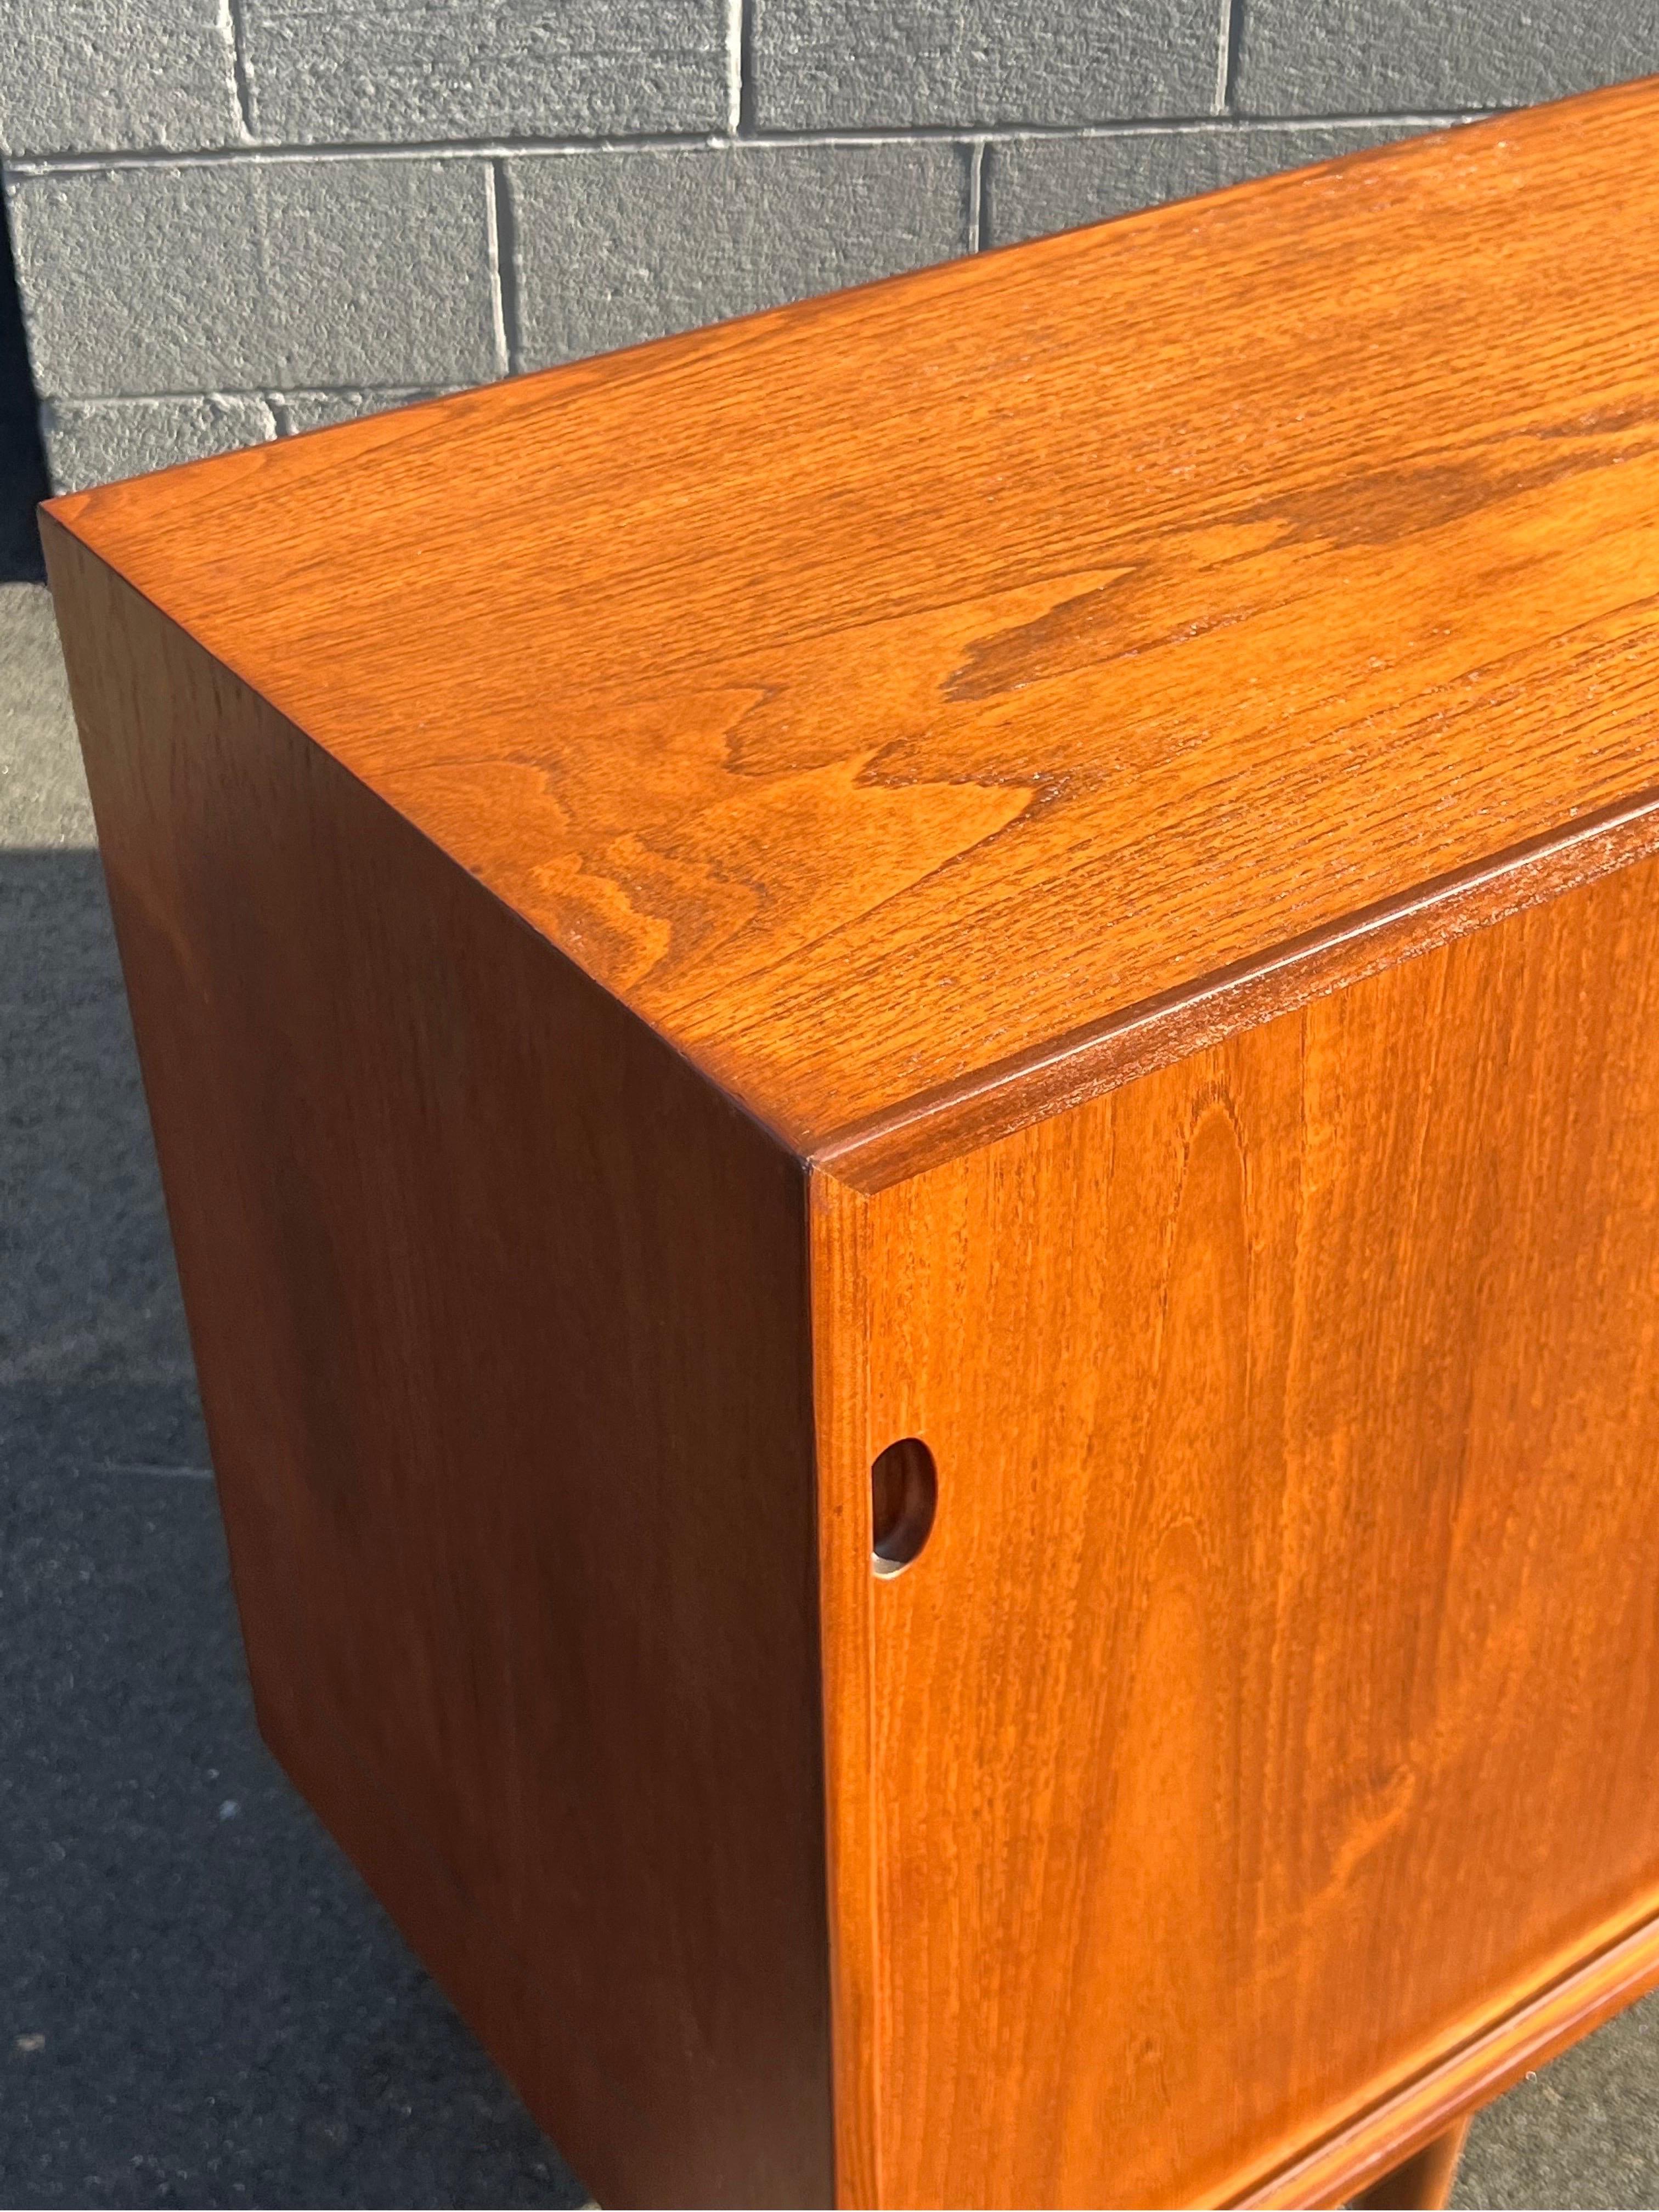 Ib Kofod-Larsen Teak Credenza for Clausen and Sons For Sale 3